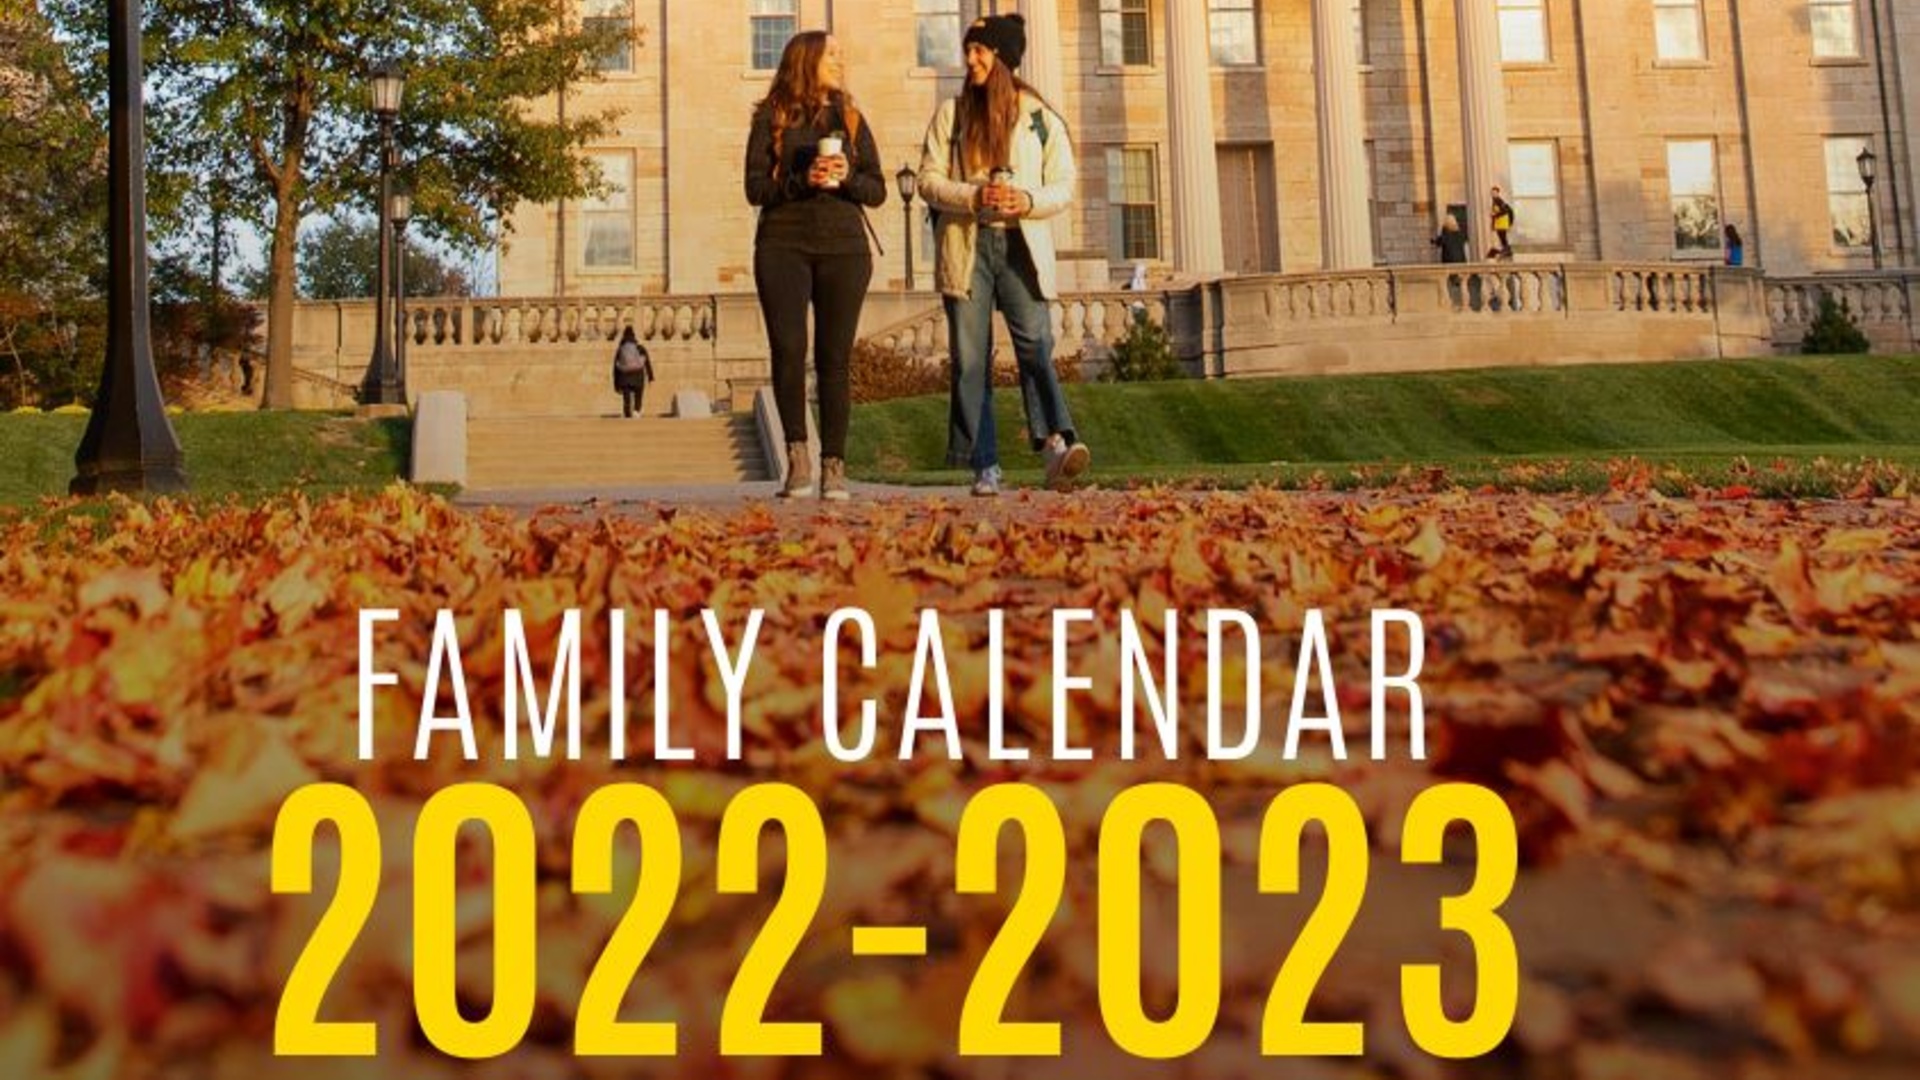 UI Parent and Family Network The University of Iowa